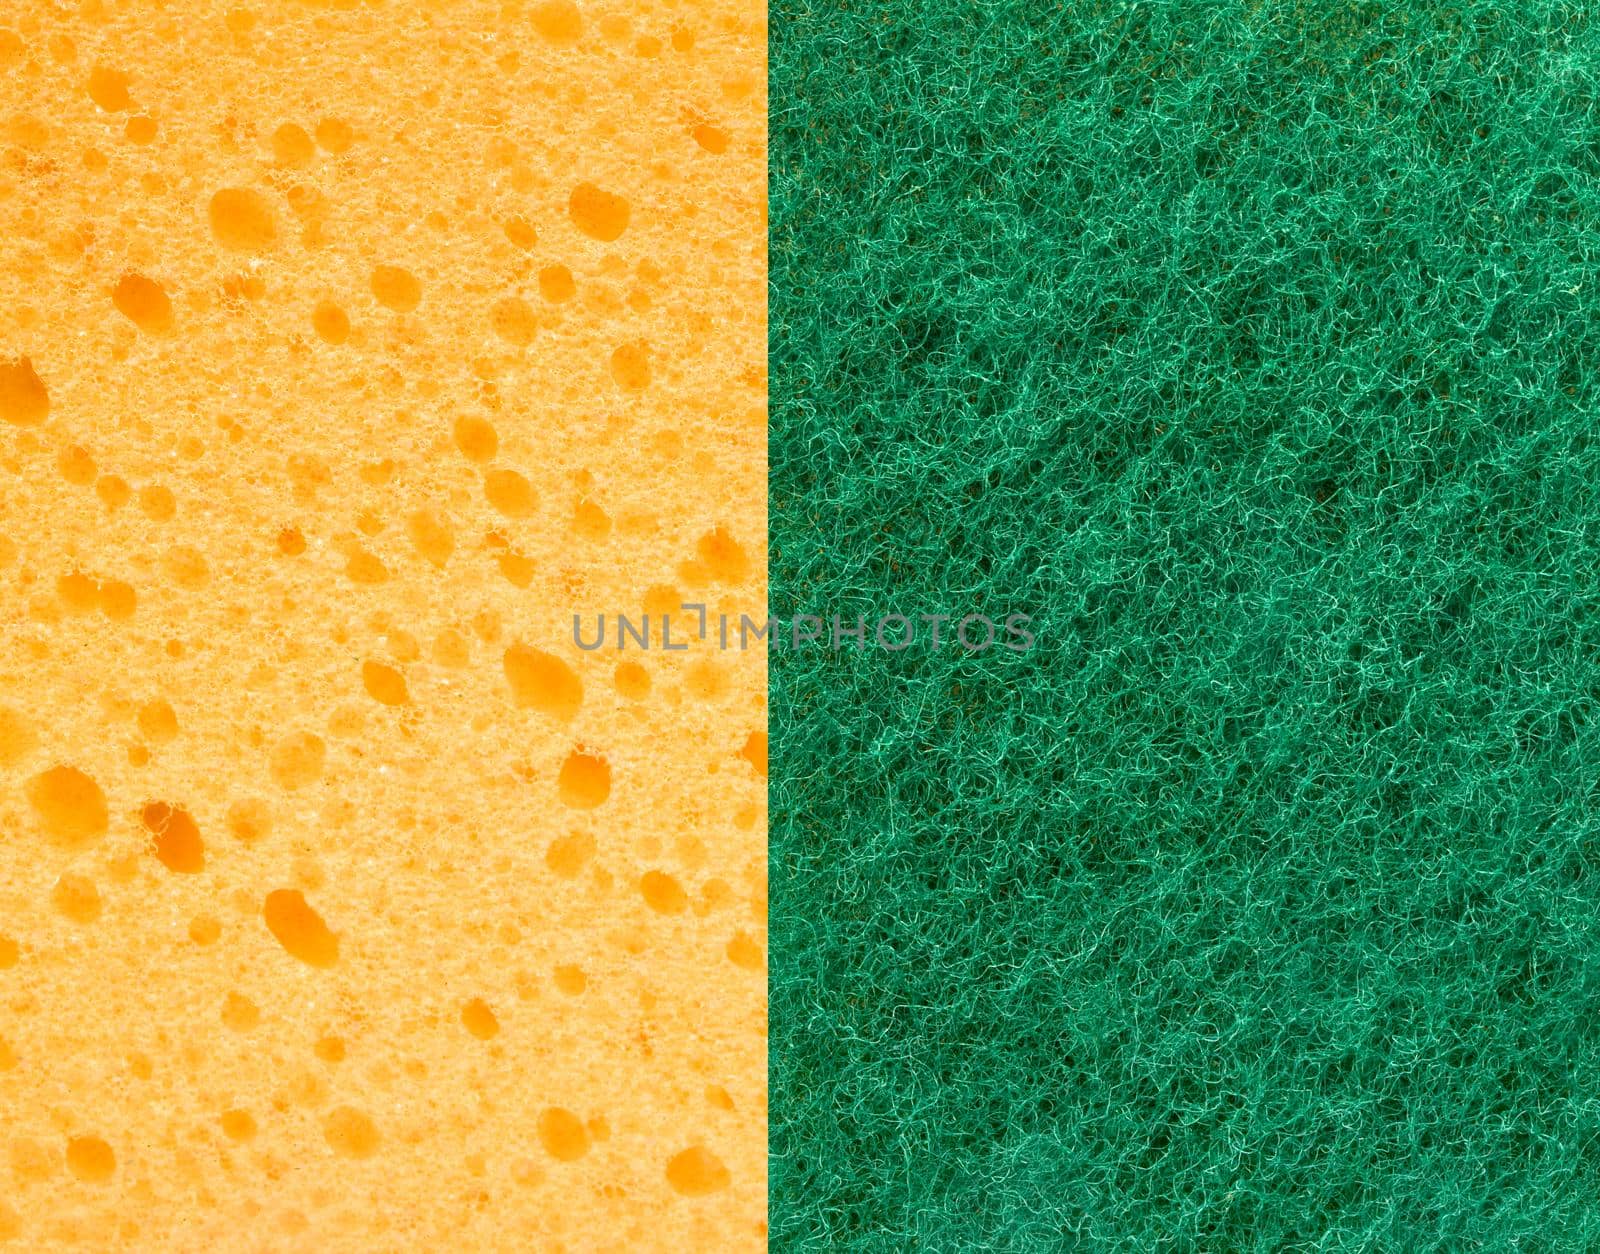 Yellow and green sponge texture for background.